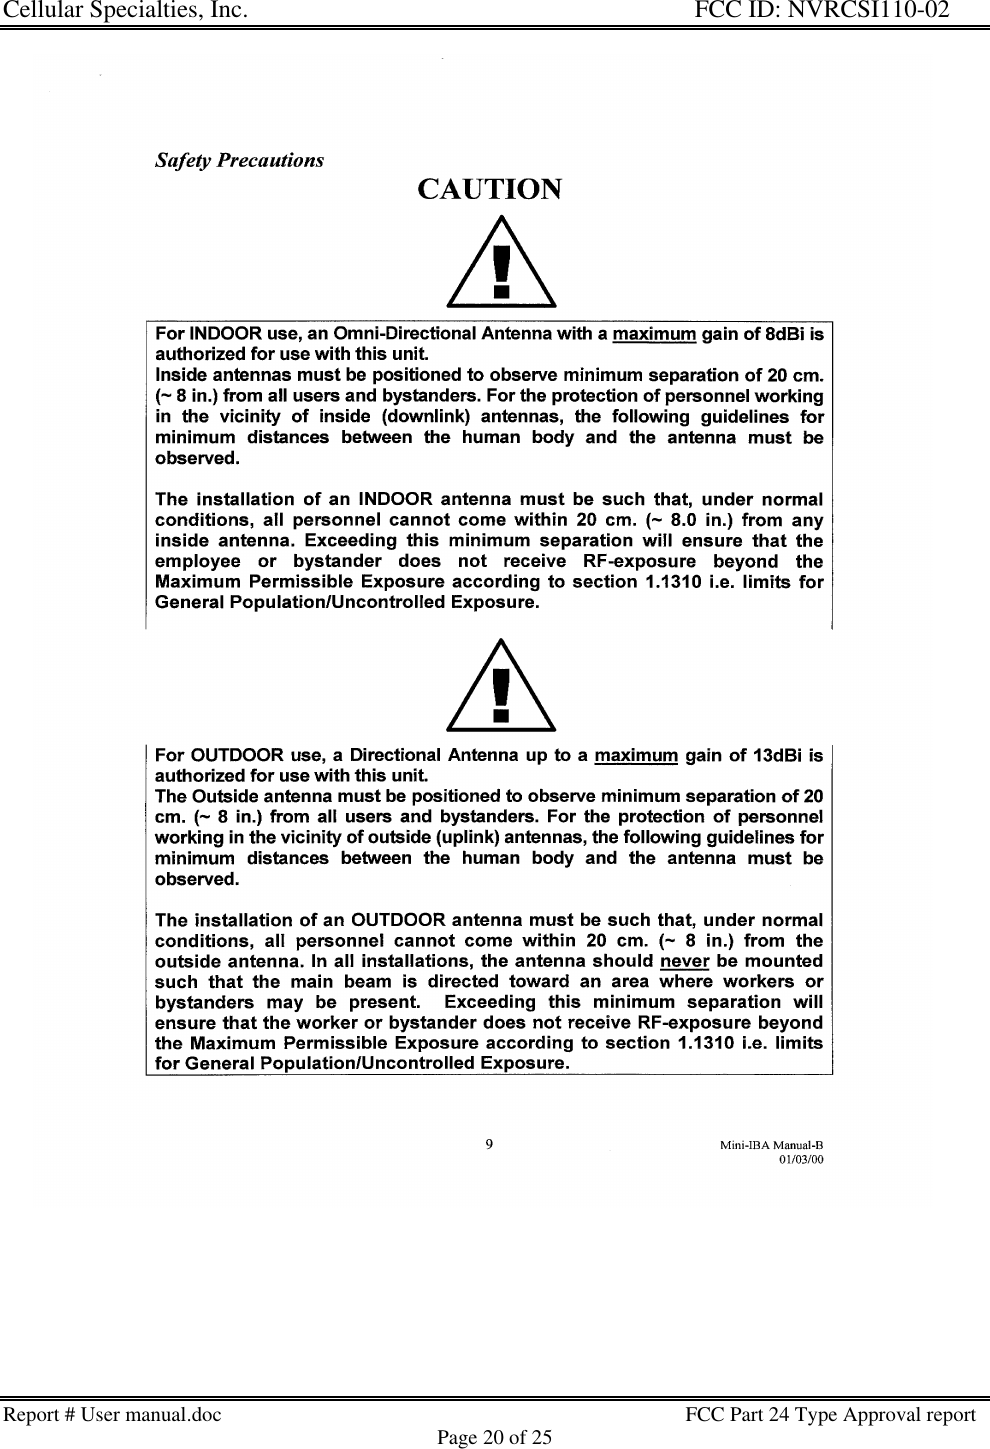 Cellular Specialties, Inc. FCC ID: NVRCSI110-02Report # User manual.doc                                                                                         FCC Part 24 Type Approval reportPage 20 of 25